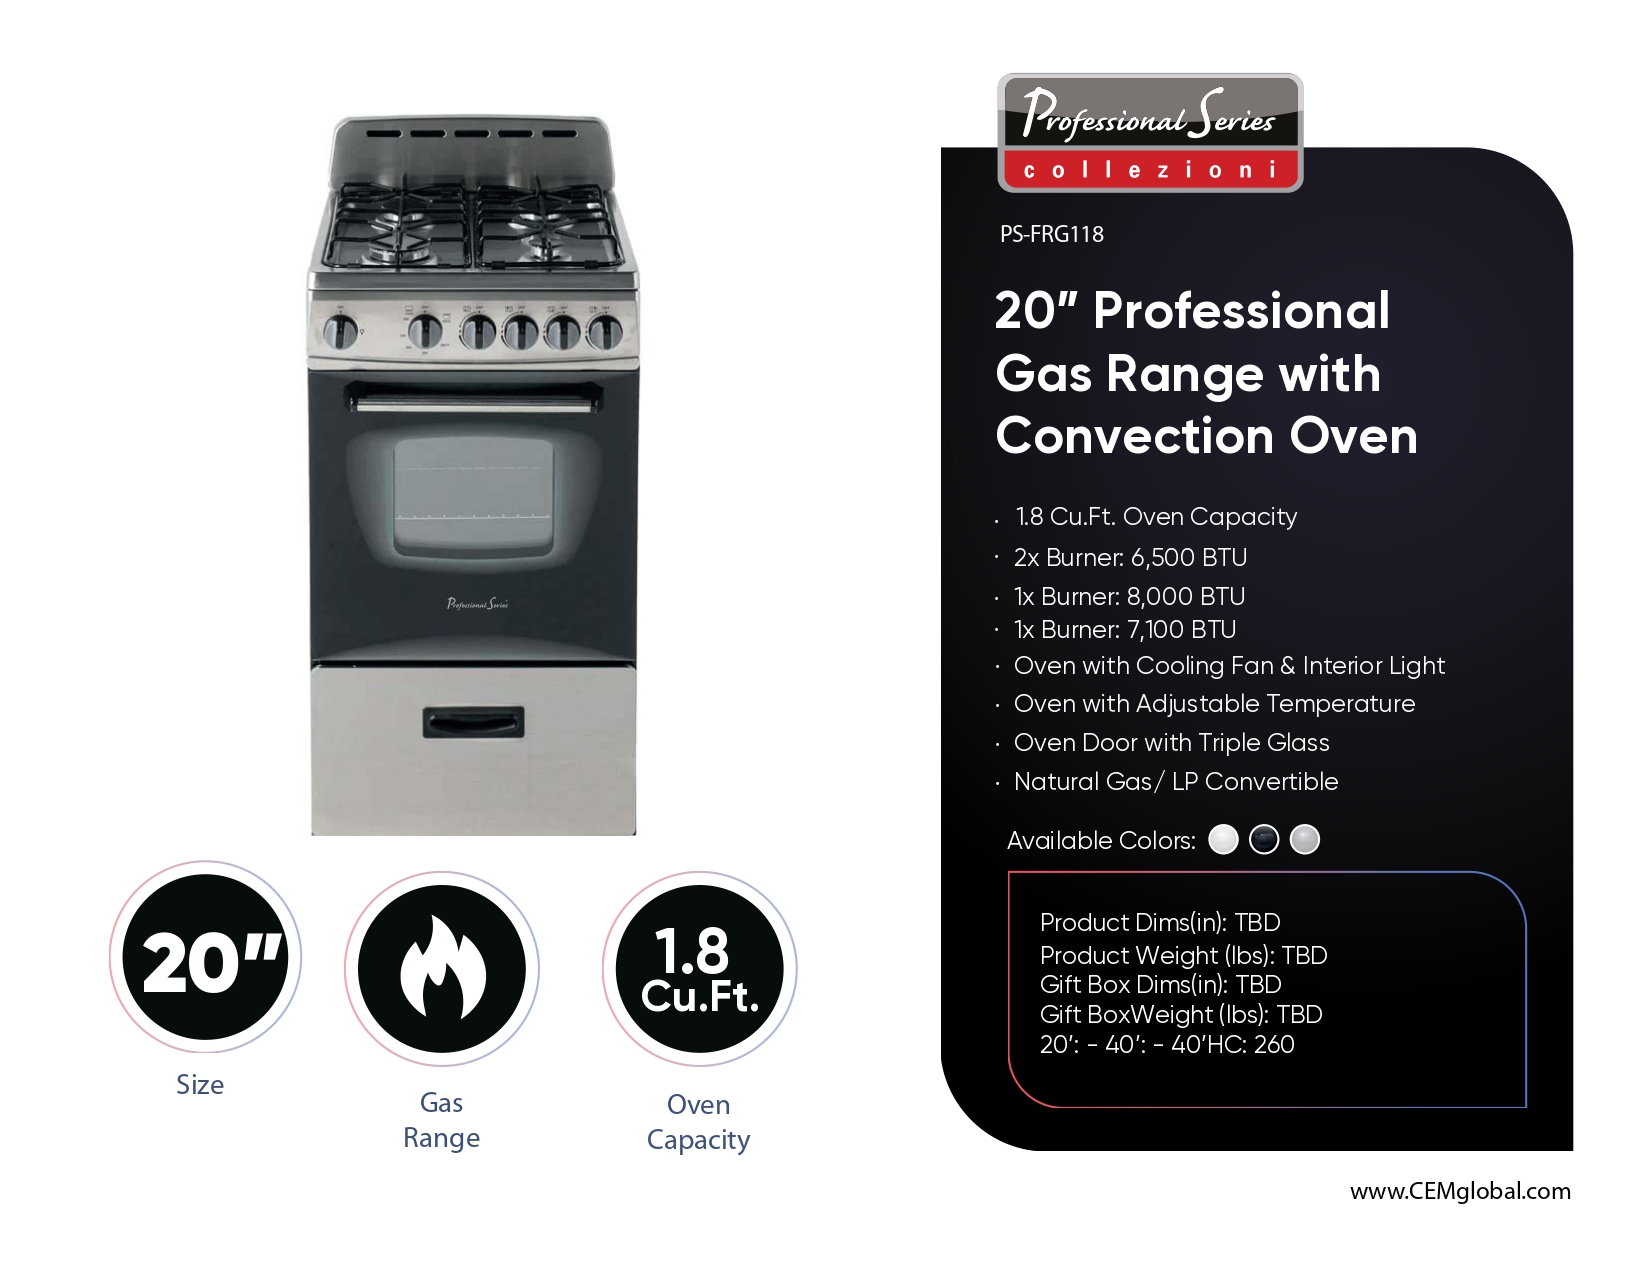 20” Professional Gas Range with Convection Oven